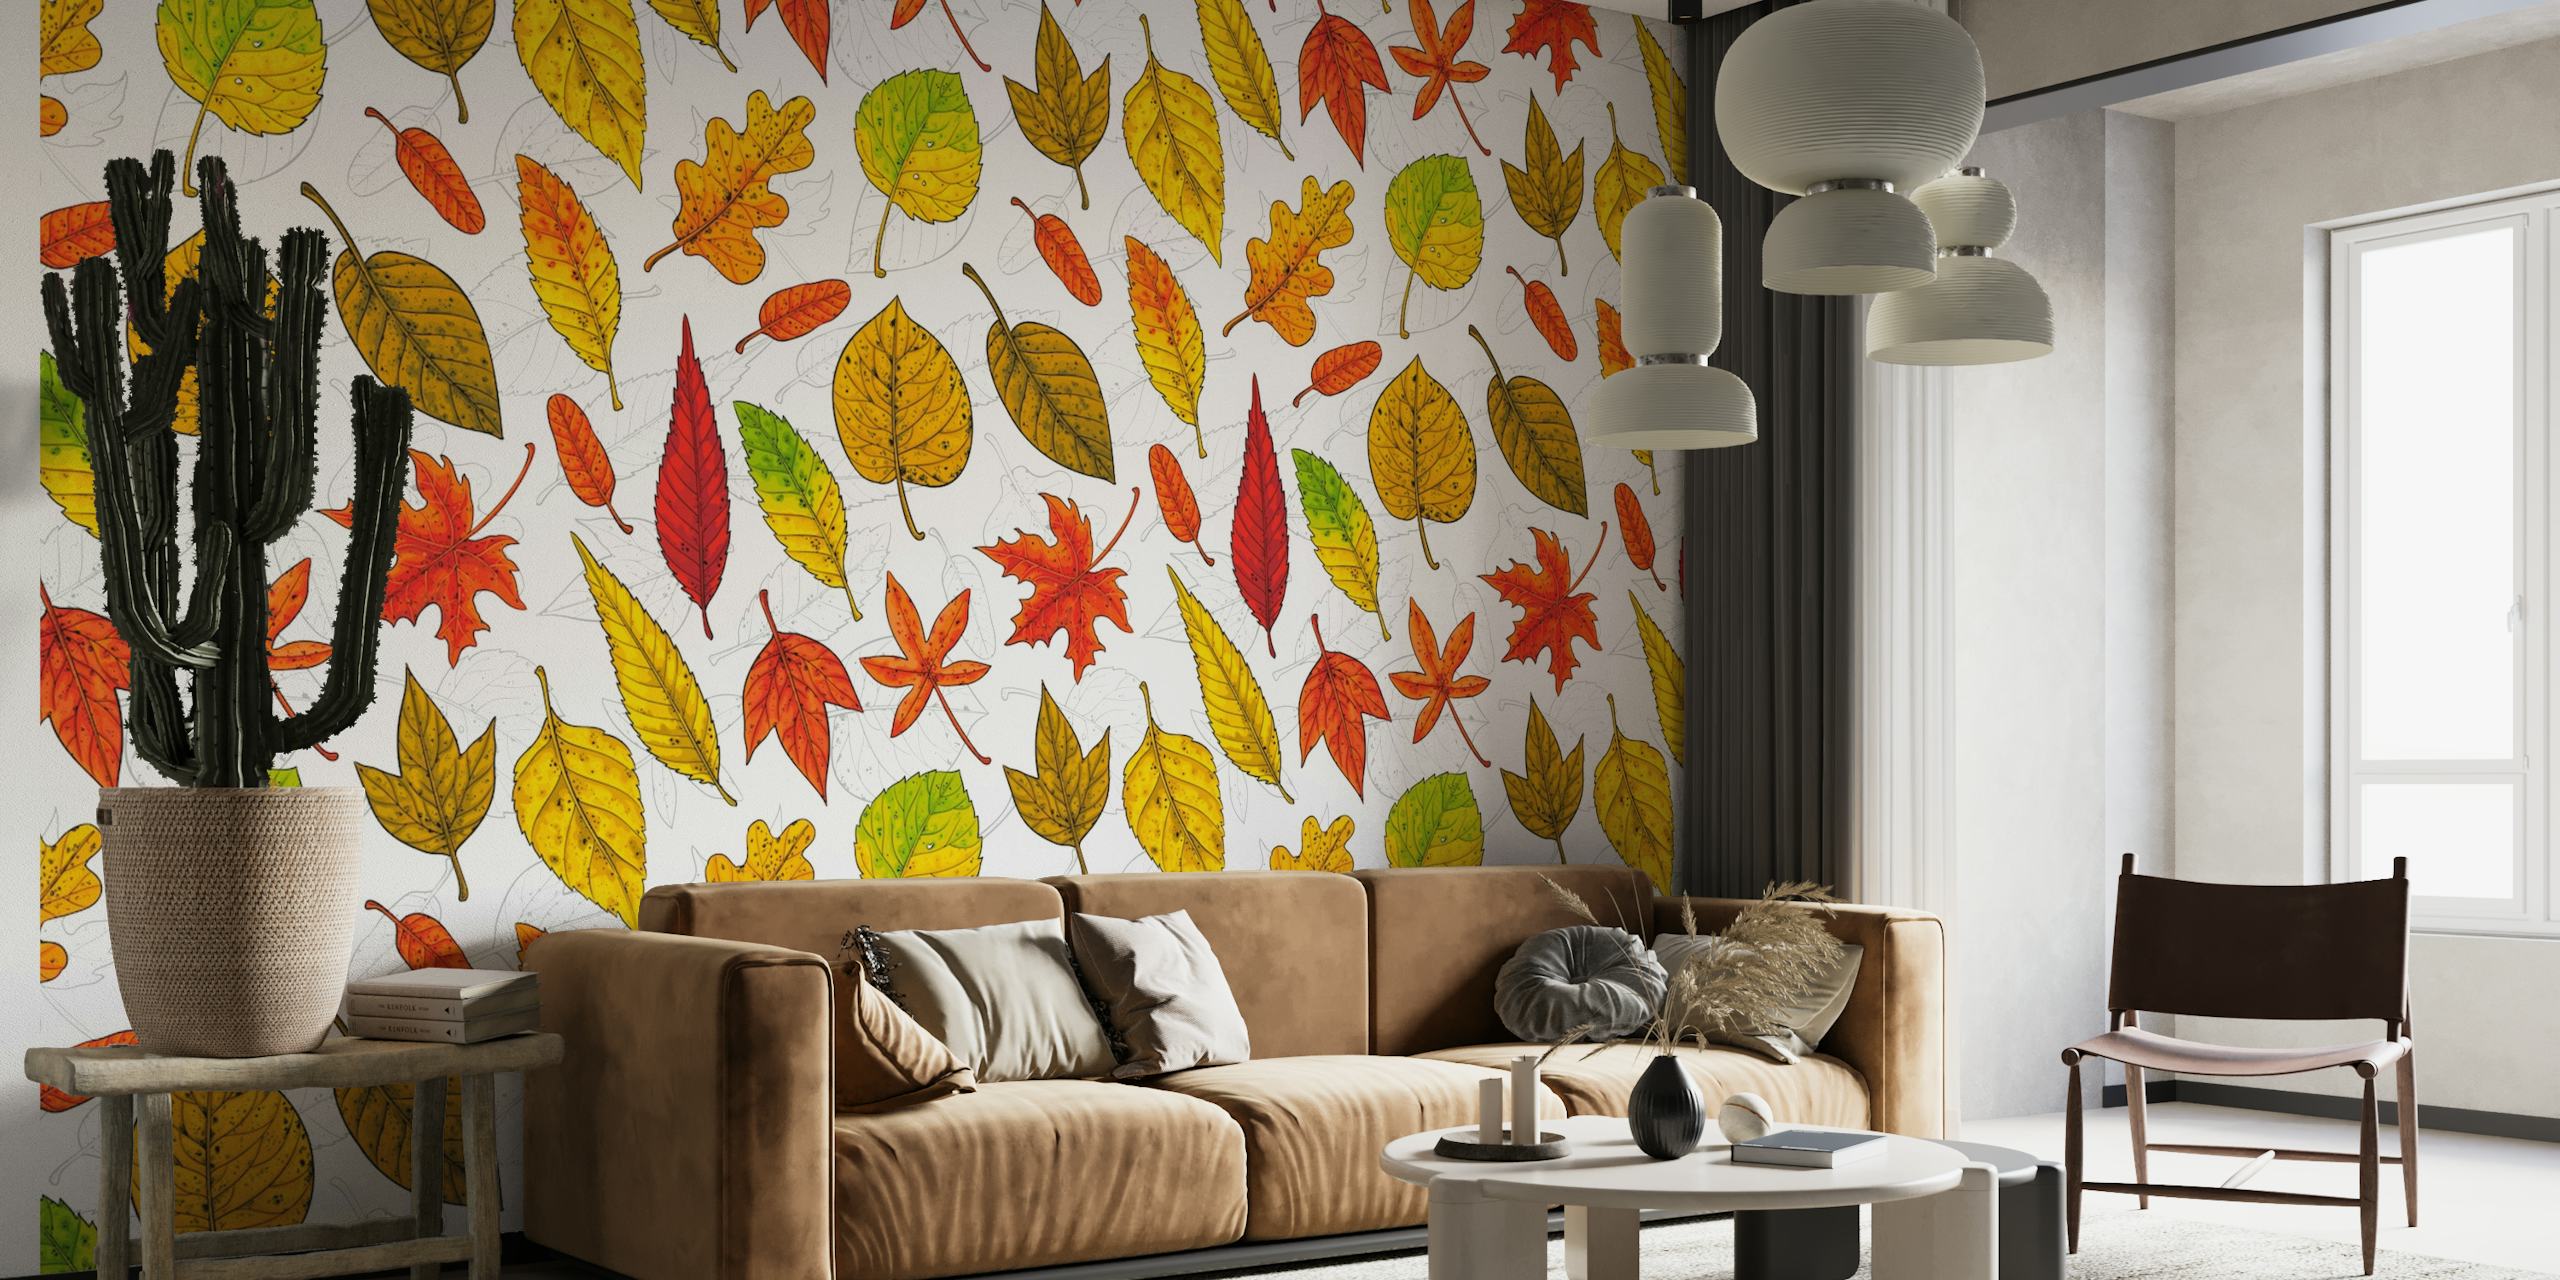 Colorful autumn leaves wall mural on a white background